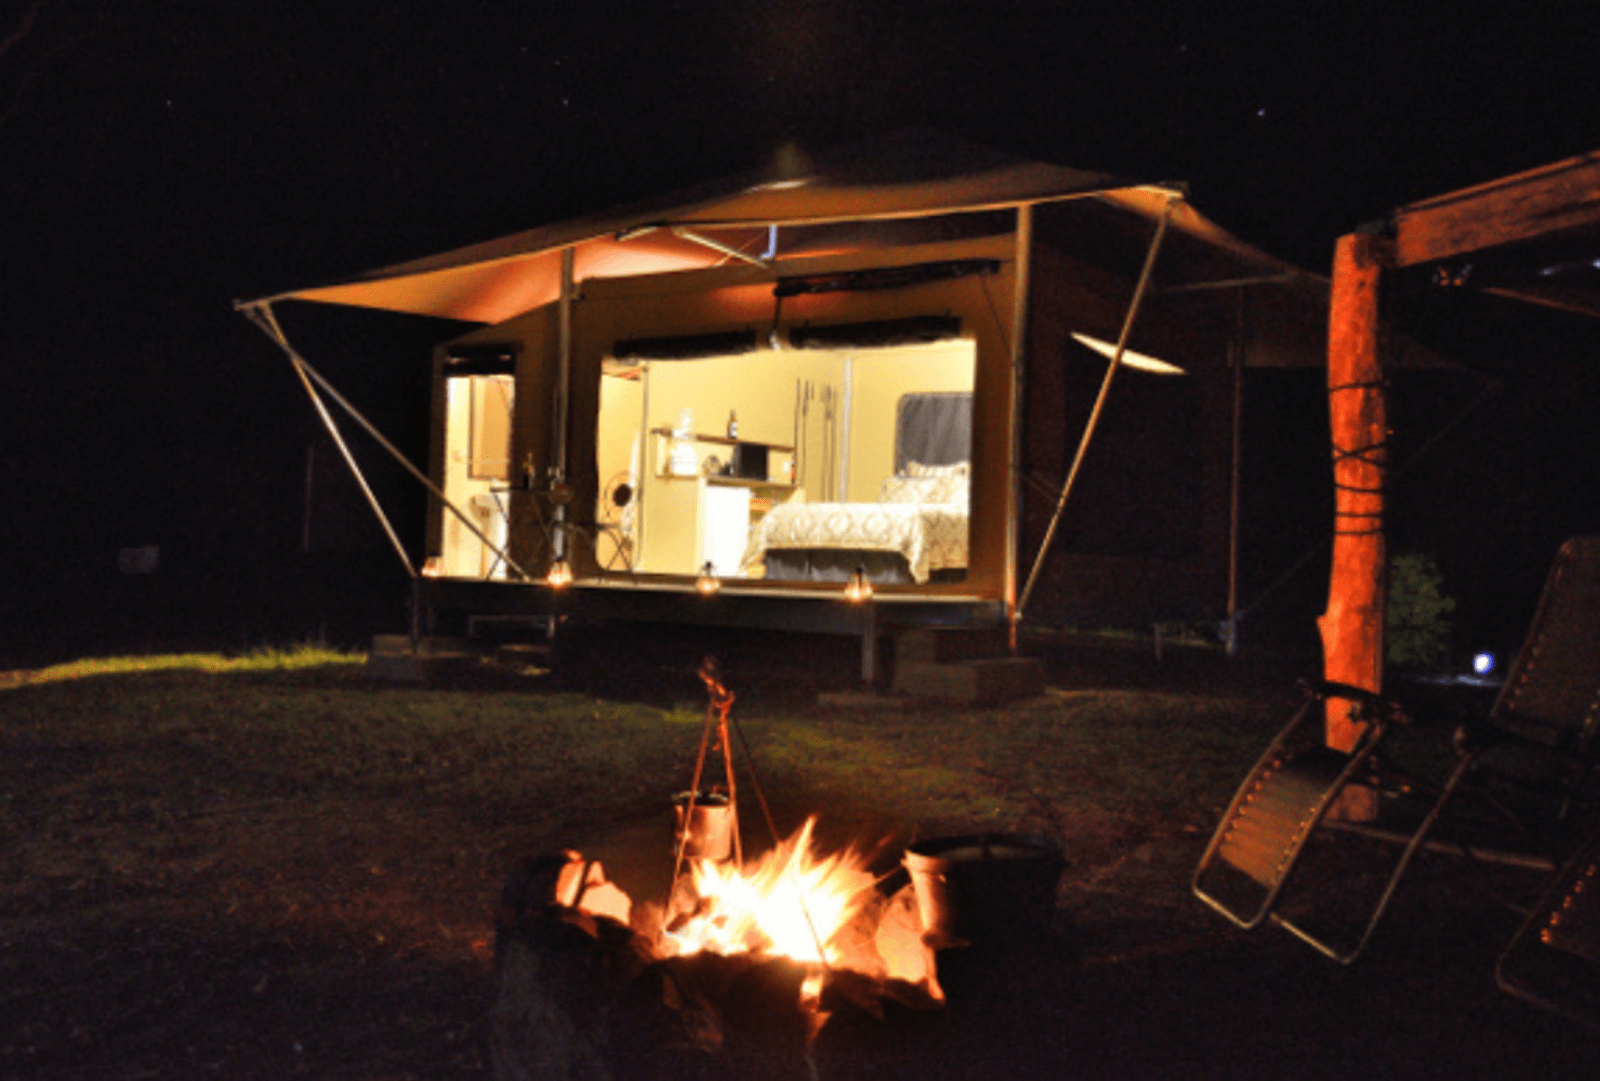 A bonfire in front of a glamping tent at night